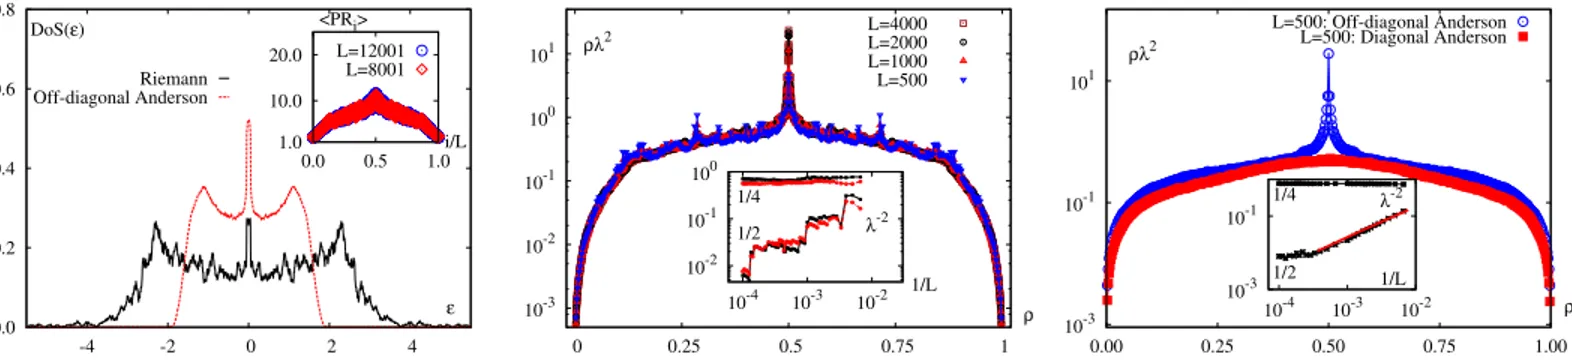 FIG. 2: (Colour online) Conduction properties in the Riemann lattice and Anderson models